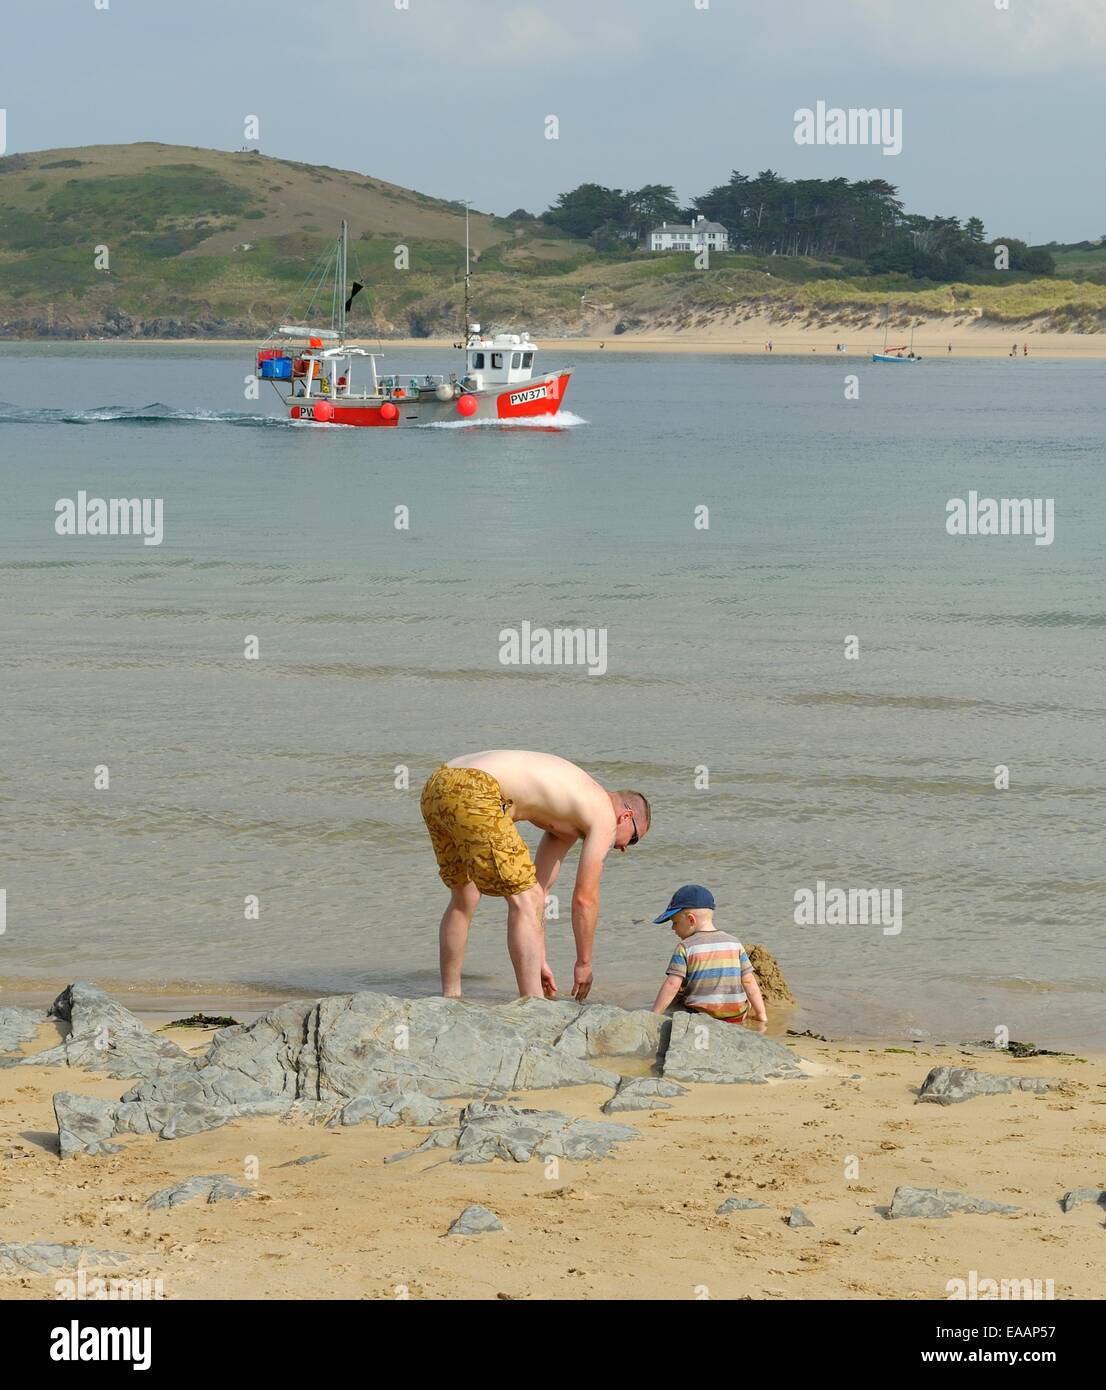 A man playing with his son on the beach in the Camel estuary,Padstow,Cornwall, England uk Stock Photo